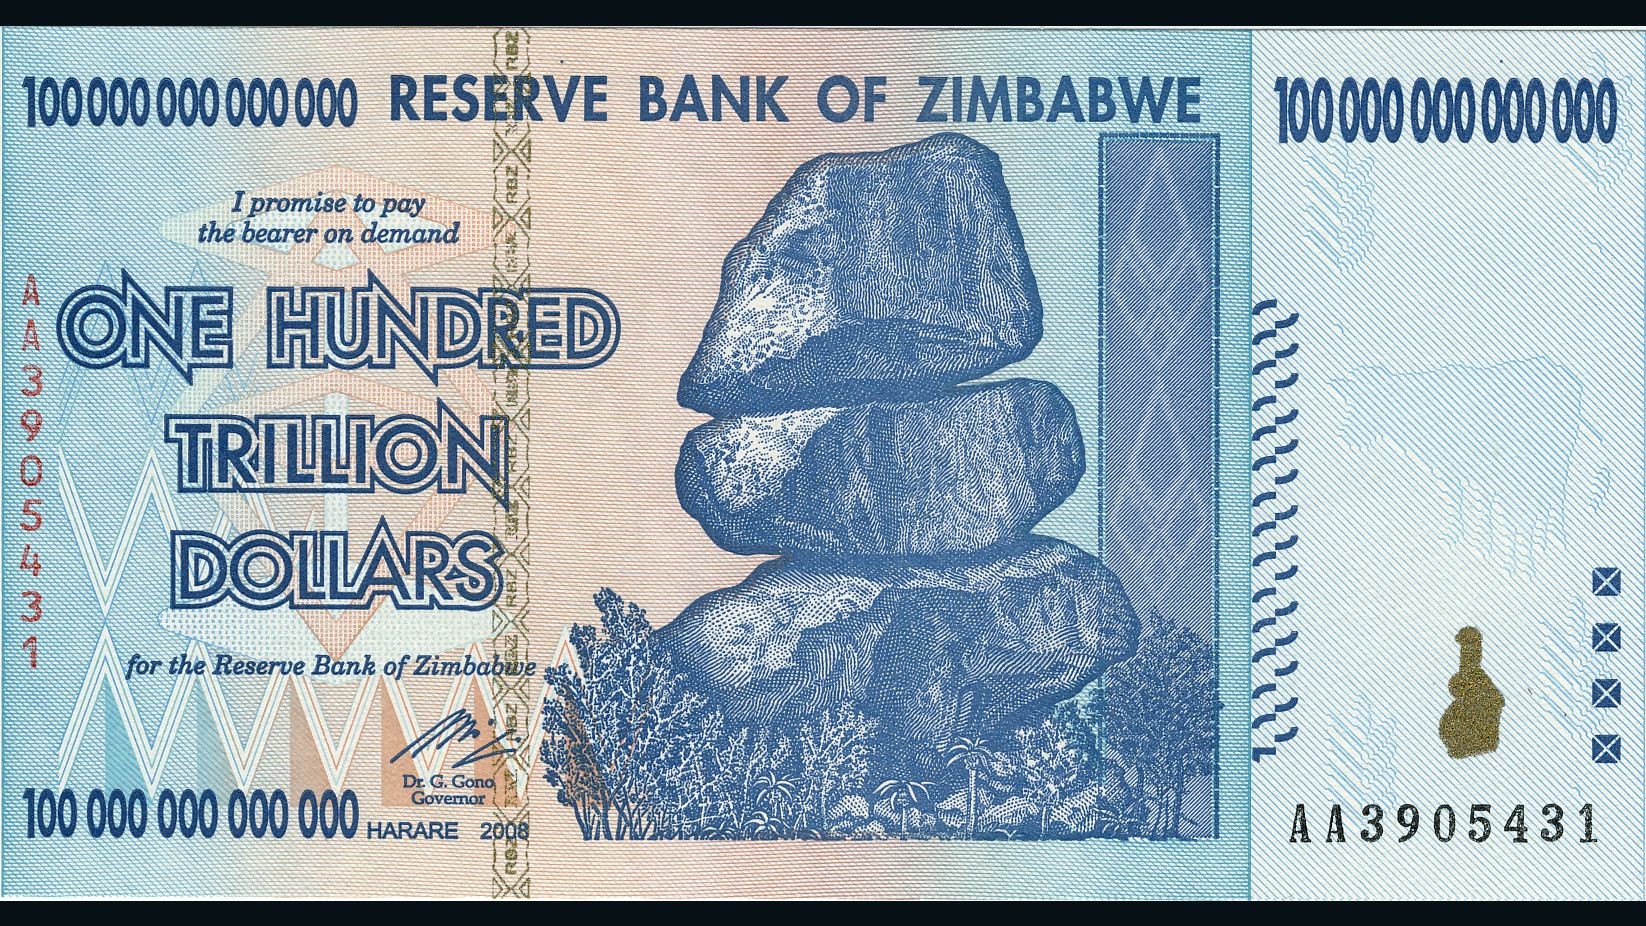 A photo of a one hundred trillion dollar note, issued by Zimbabwe's central bank after hyperinflation. Zimbabwe now uses US currency. 